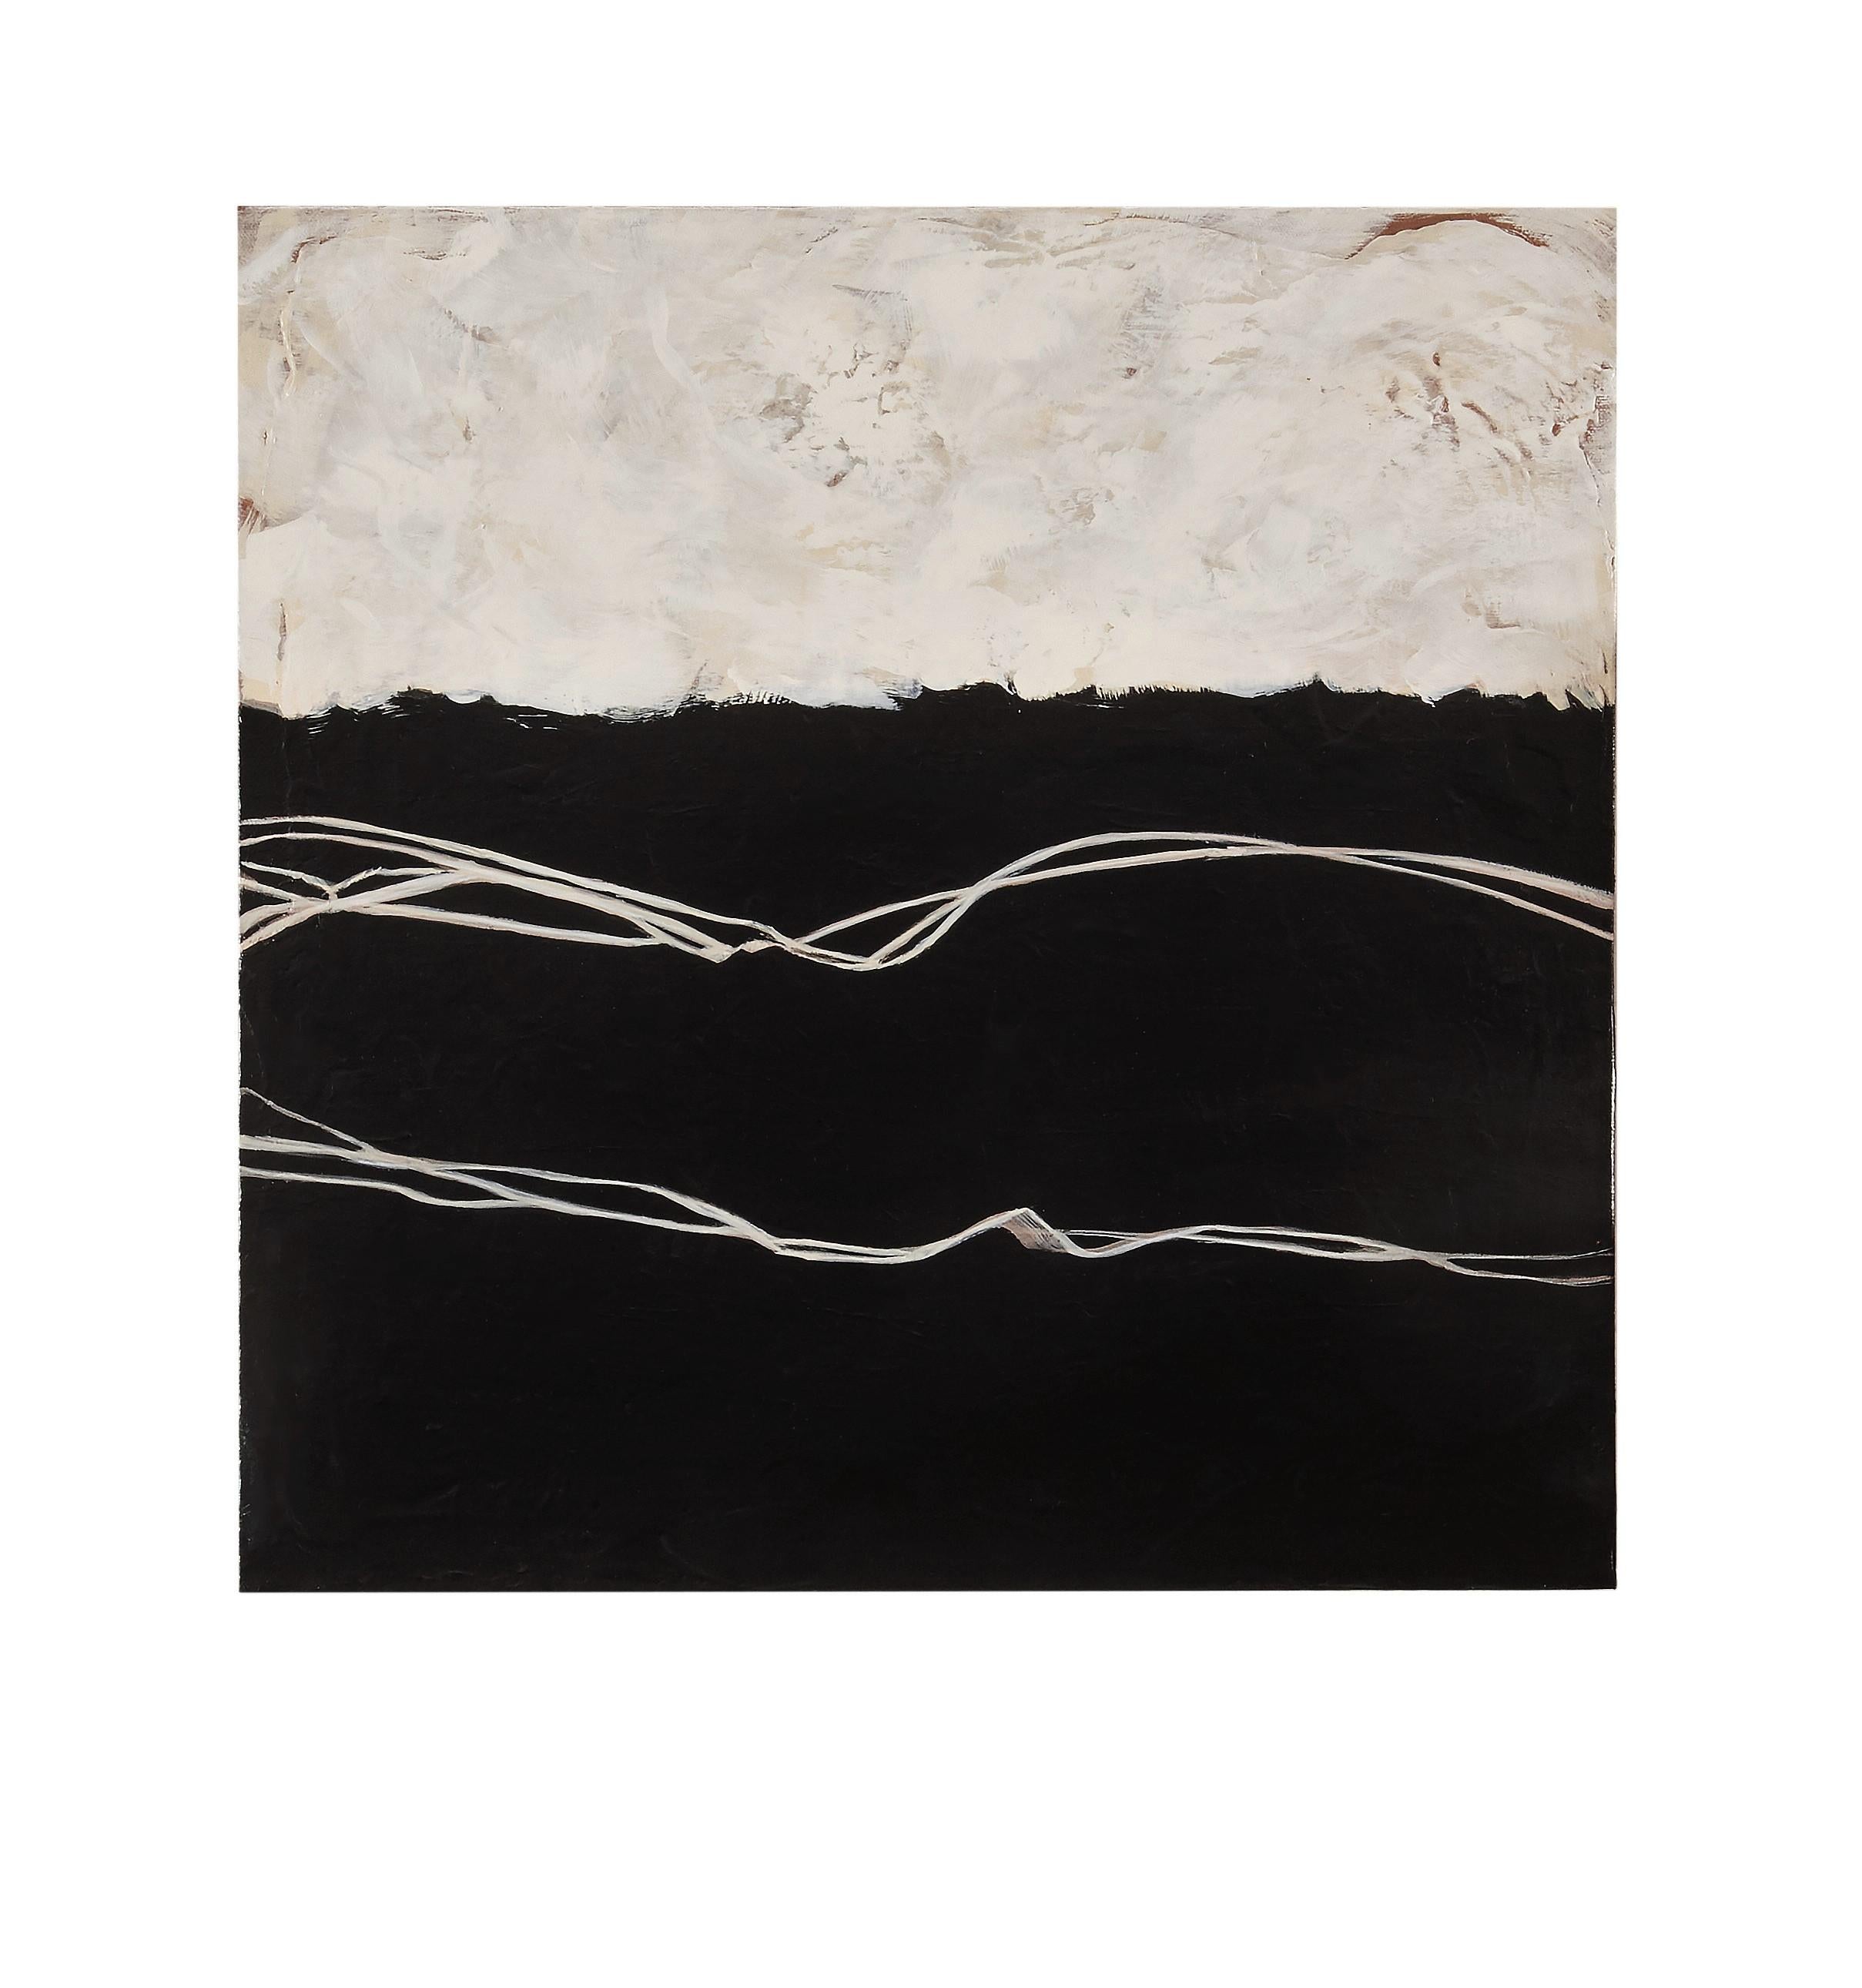 Endeavor, Trust - Contemporary Square Abstract Painting in Neutral + White + Bla - Black Landscape Painting by Helen Bellaver